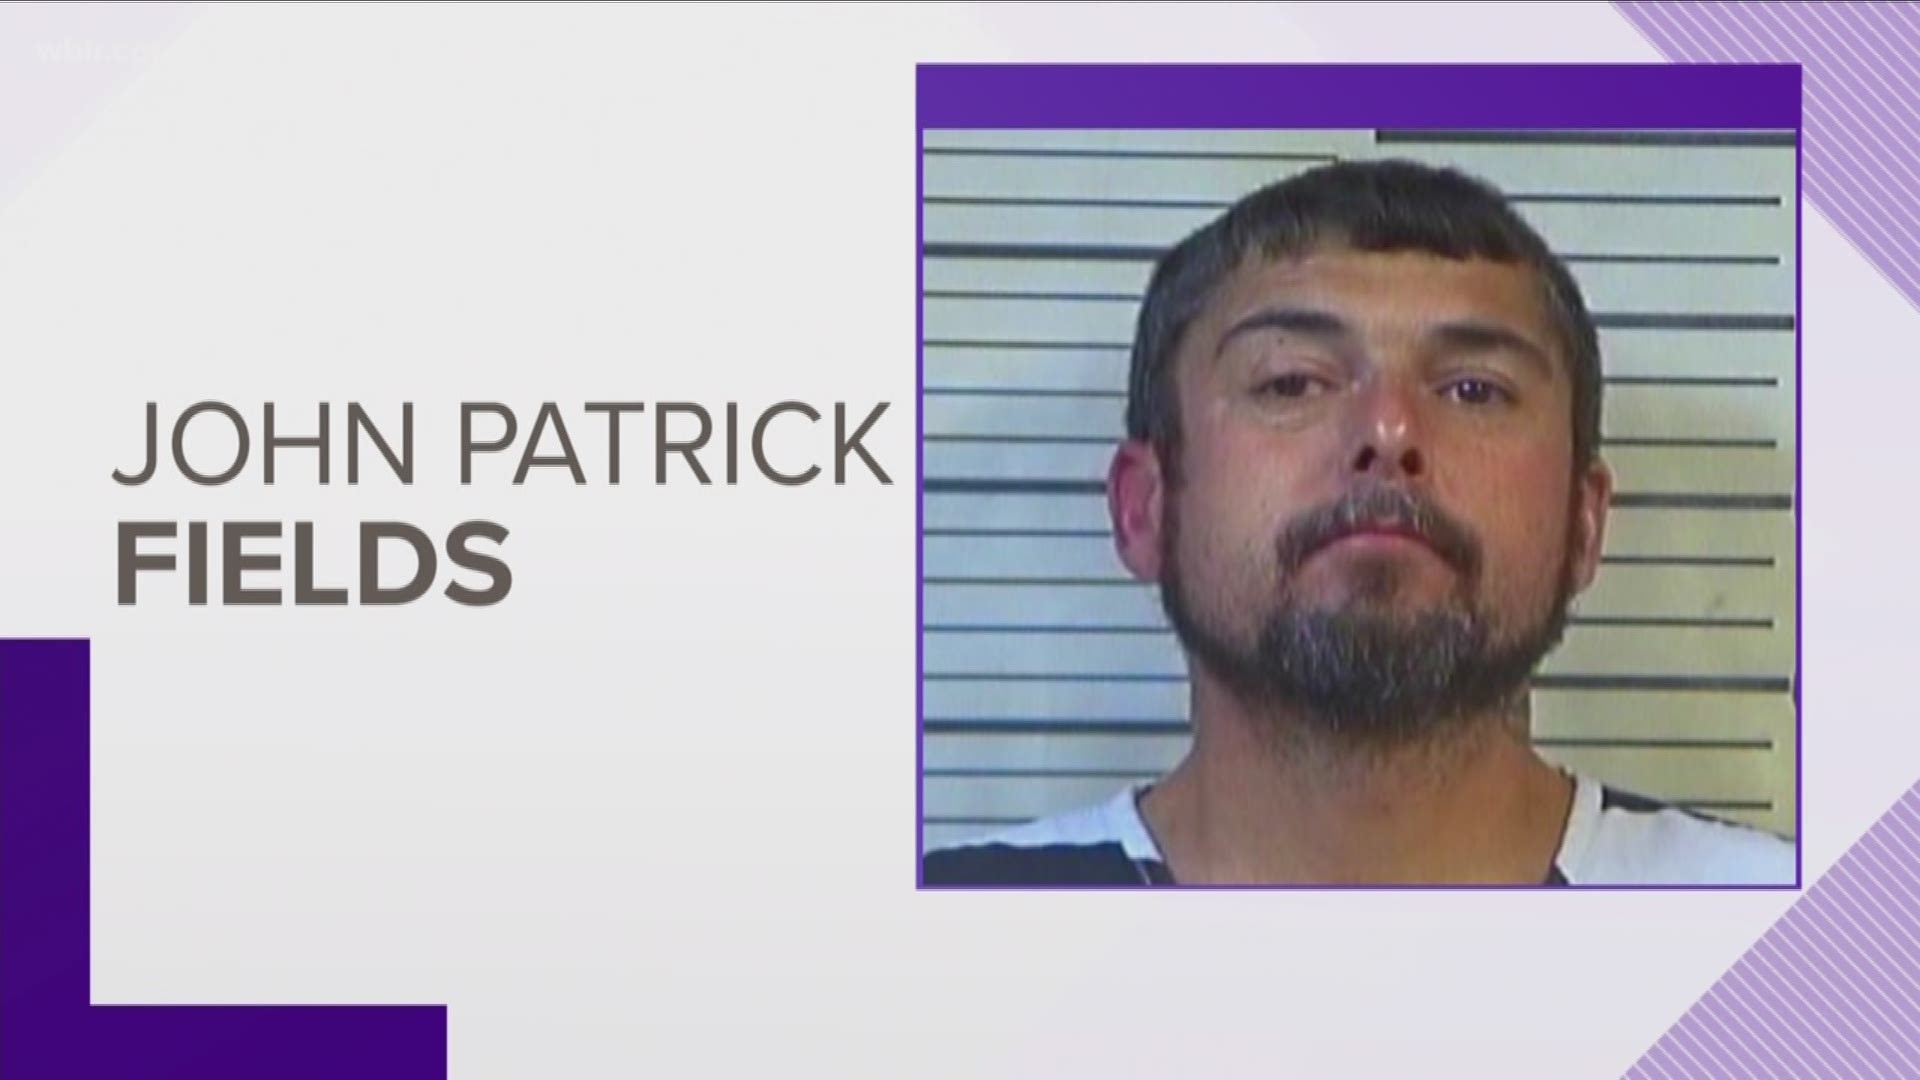 The suspect in the killings - John Patrick Fields - has a lengthy criminal history dating back to the mid-1990s.